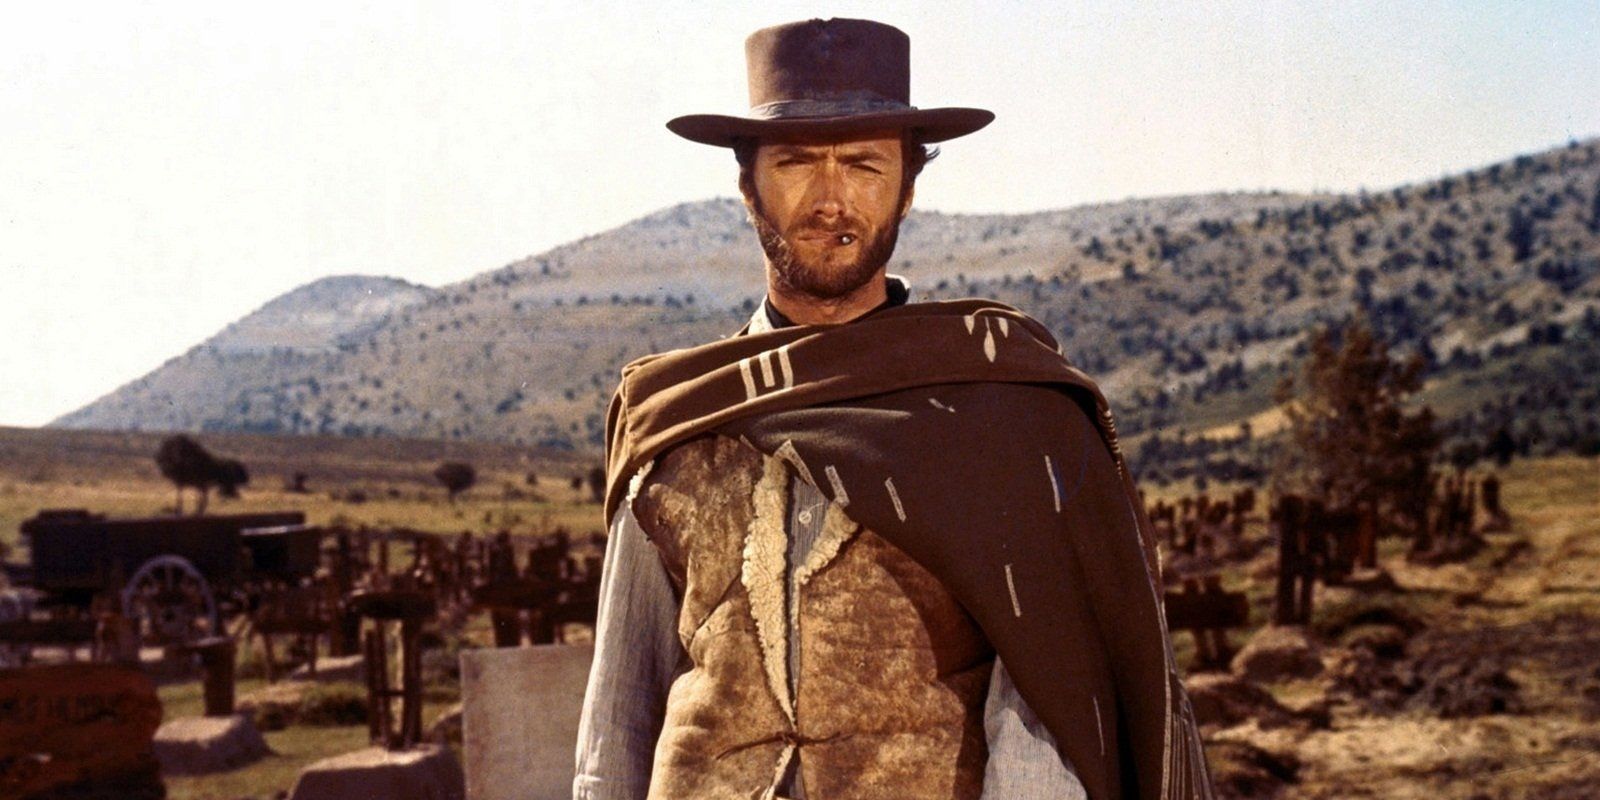 Clint Eastwood fumando um charuto em The Good, the Bad, and the Ugly